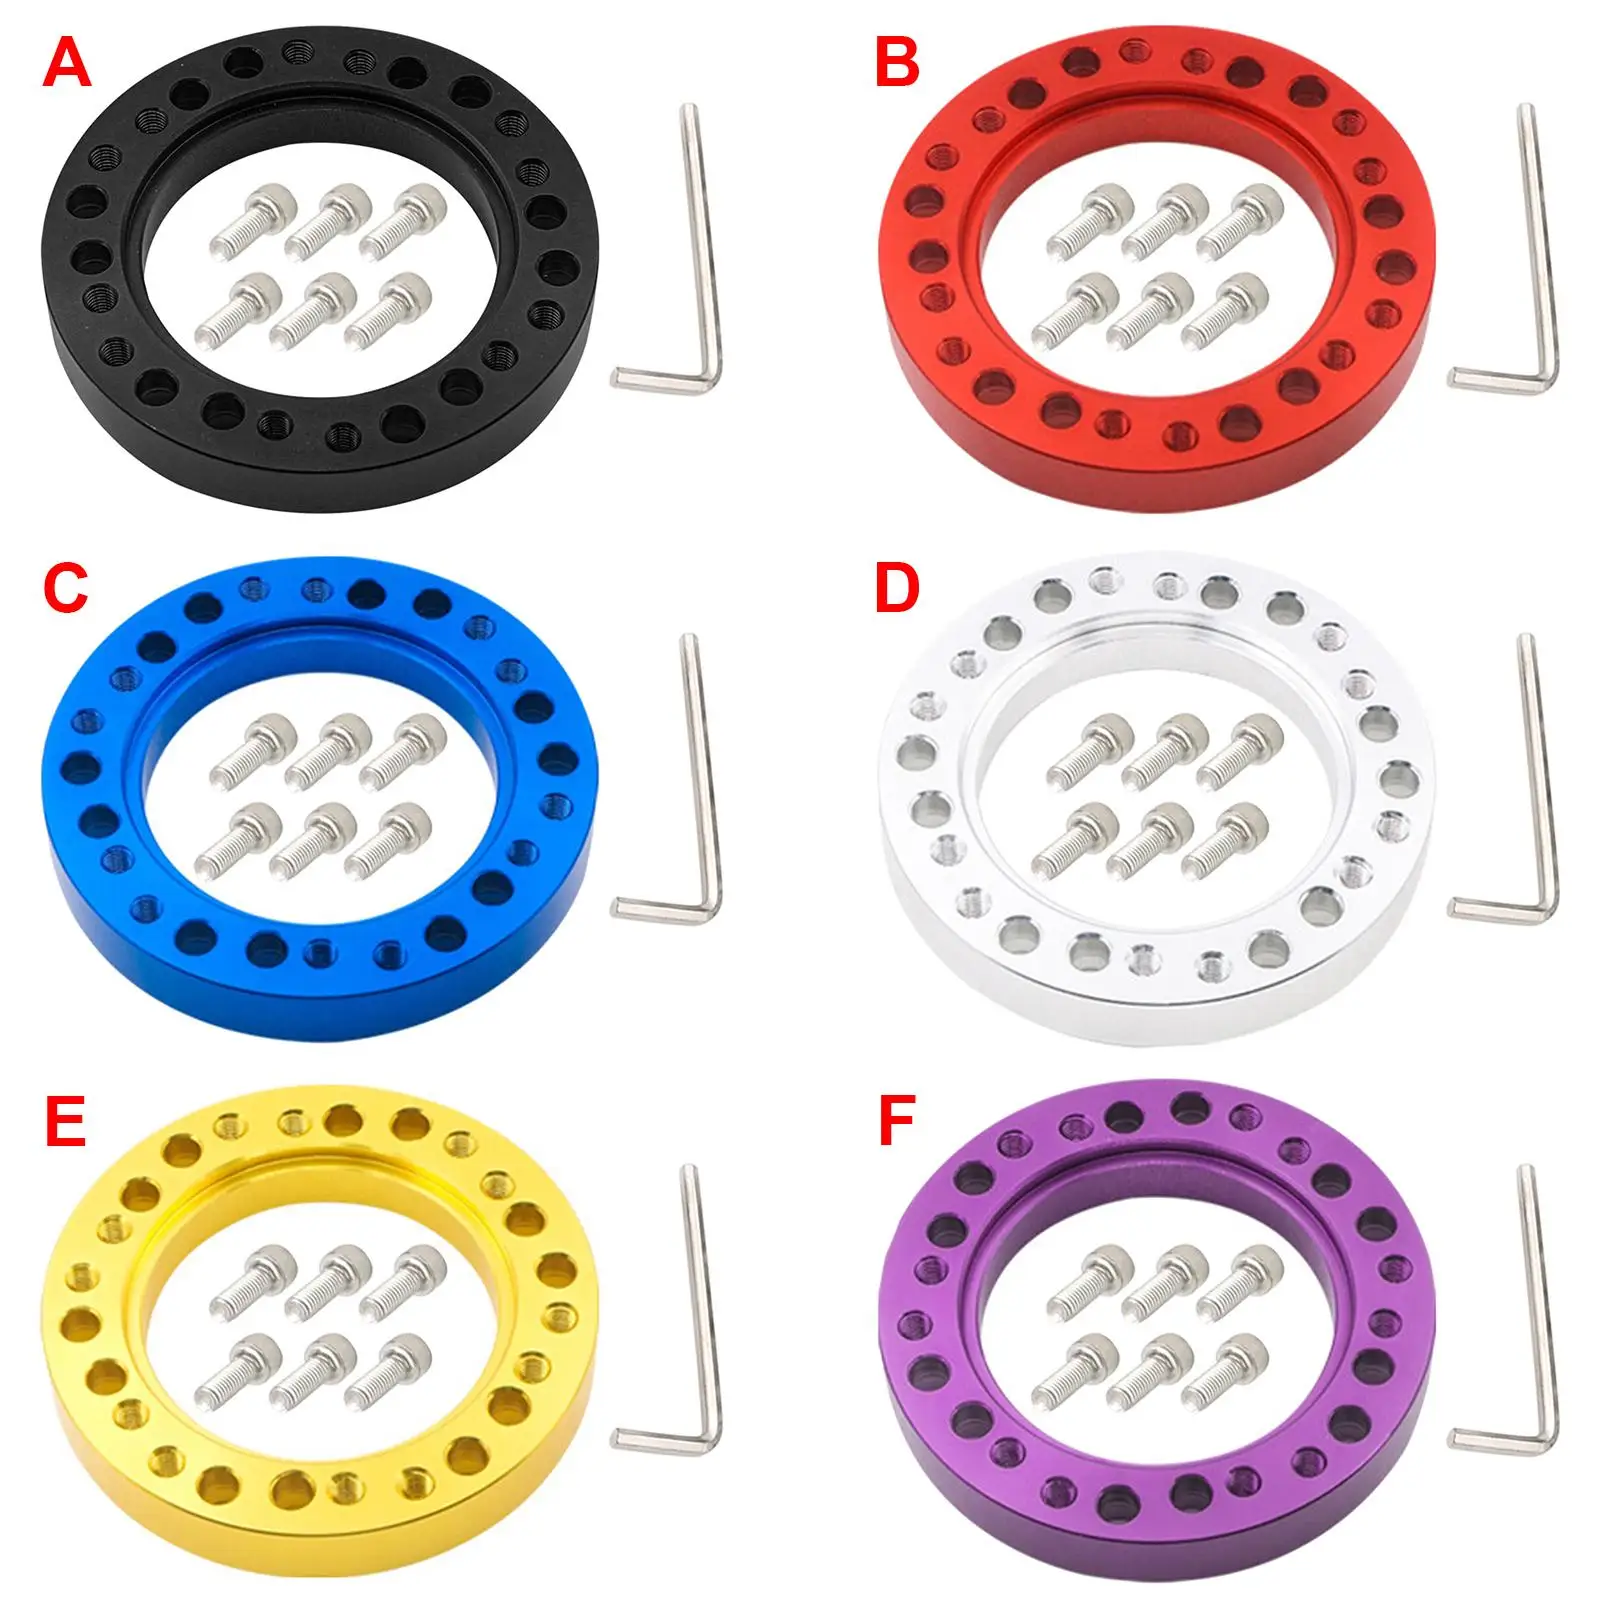 Aluminum Alloy Car Steering Wheel Hub Adapter Spacer Pad with Six Screws Vehicle Parts